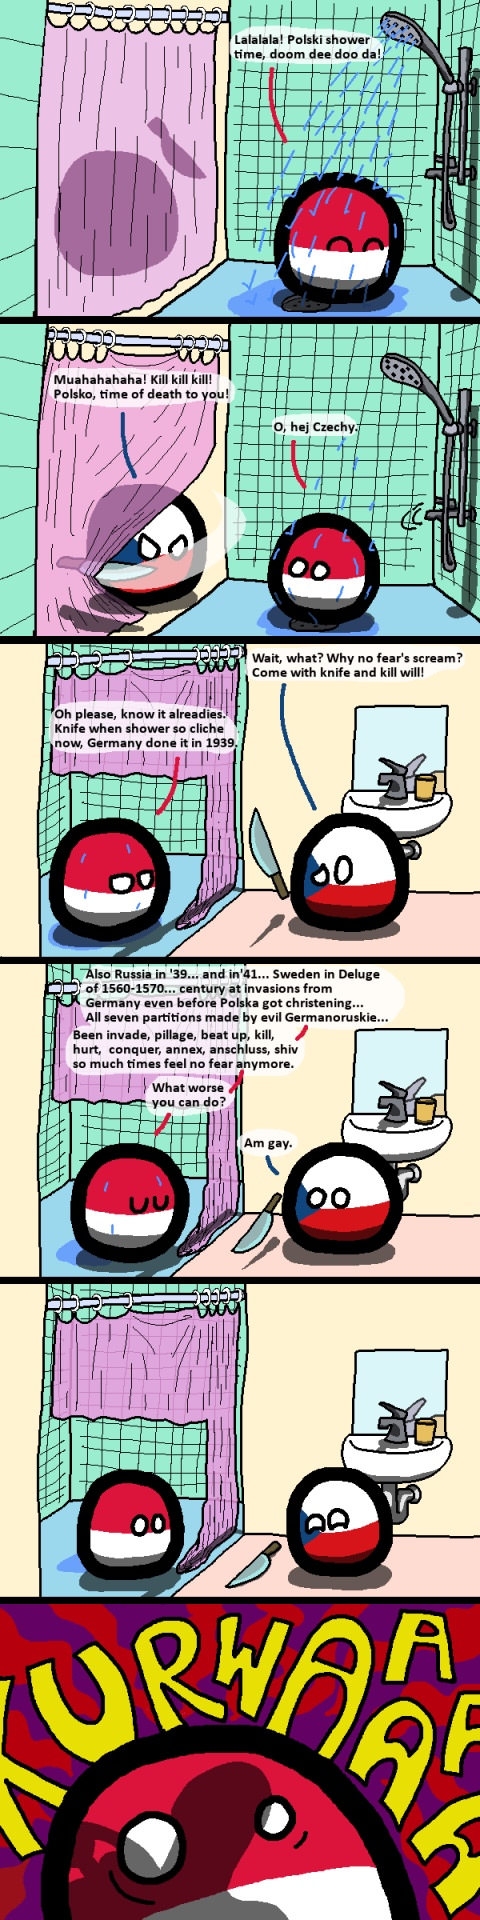 Poland gets scared